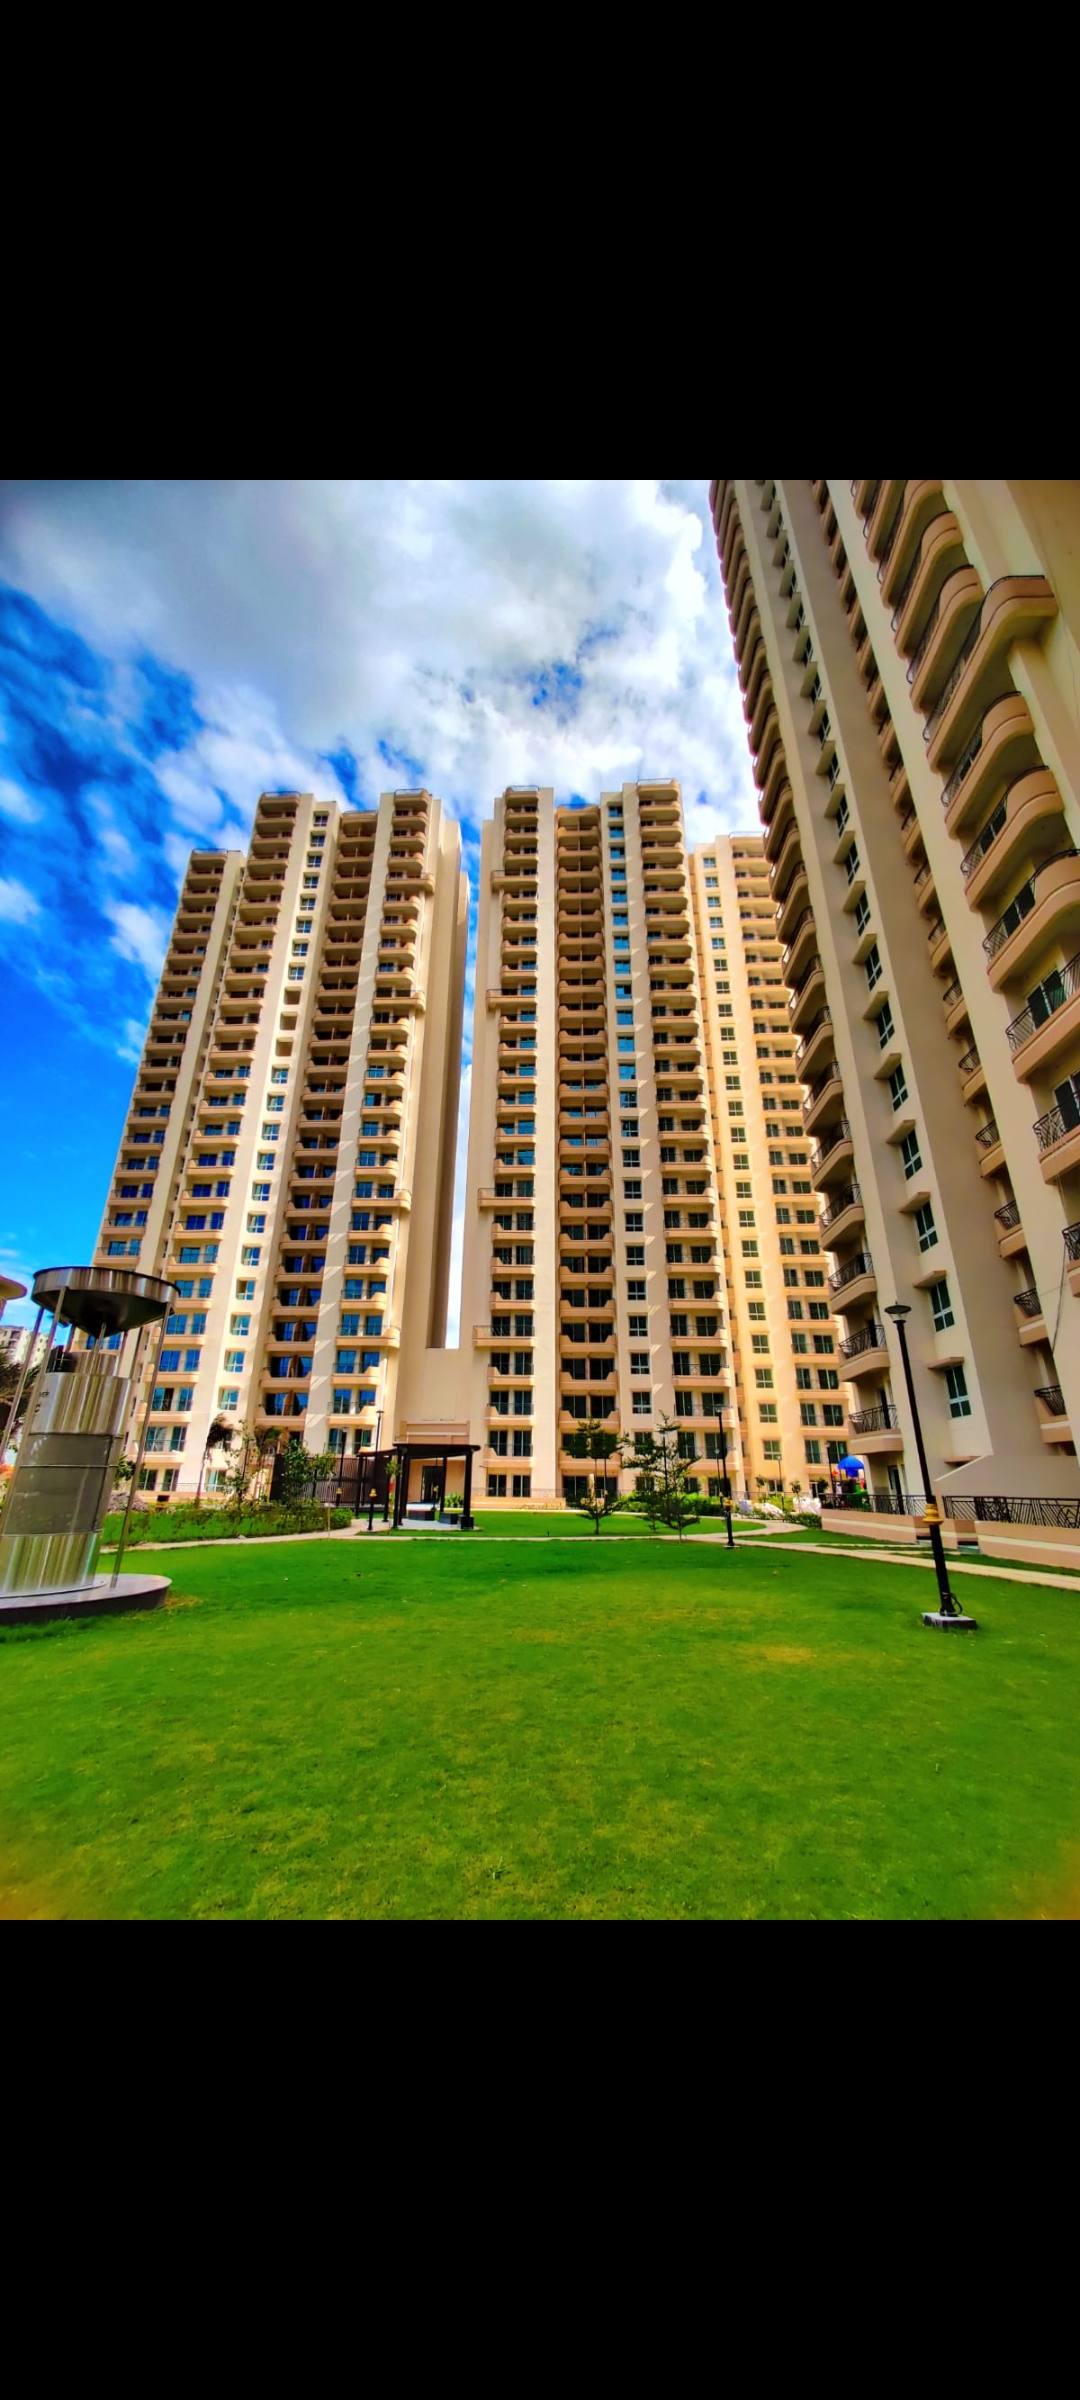 CRC SUBLIMIS 2+1 BHK Residential Flat For Sale in Noida Extension